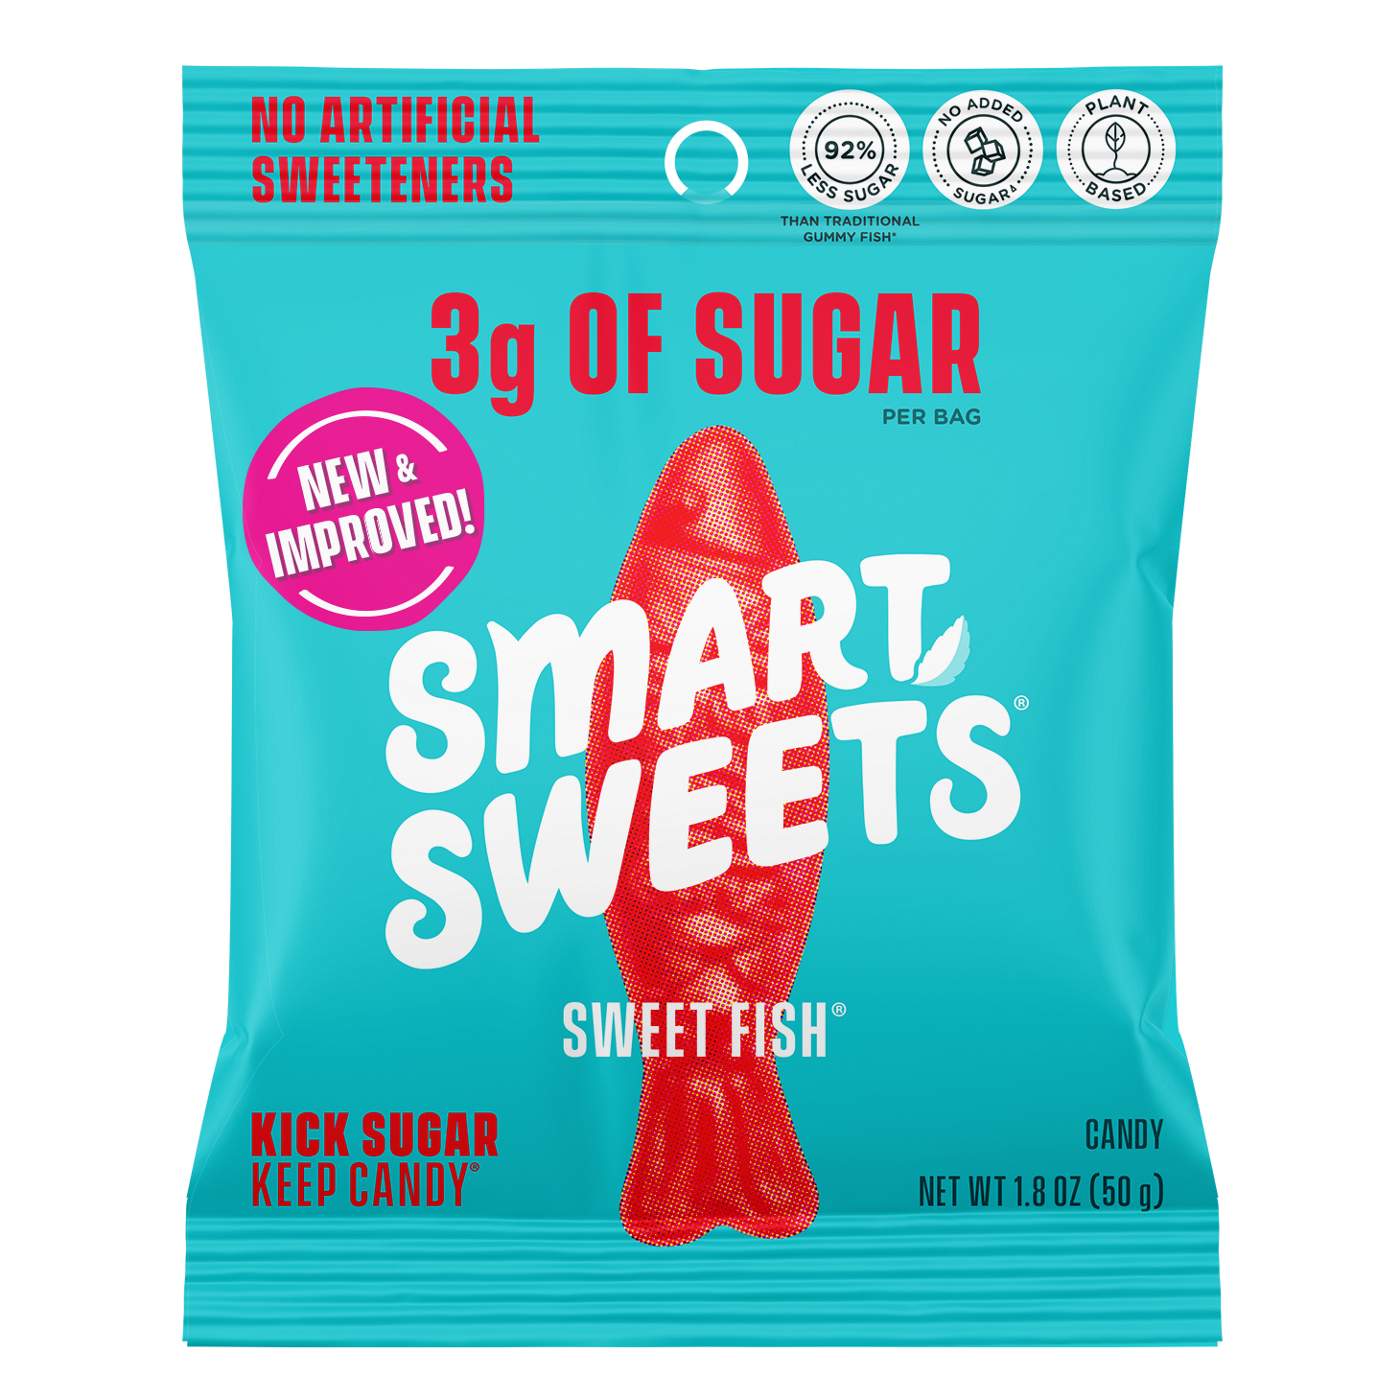 SmartSweets Sweet Fish Candy; image 1 of 2